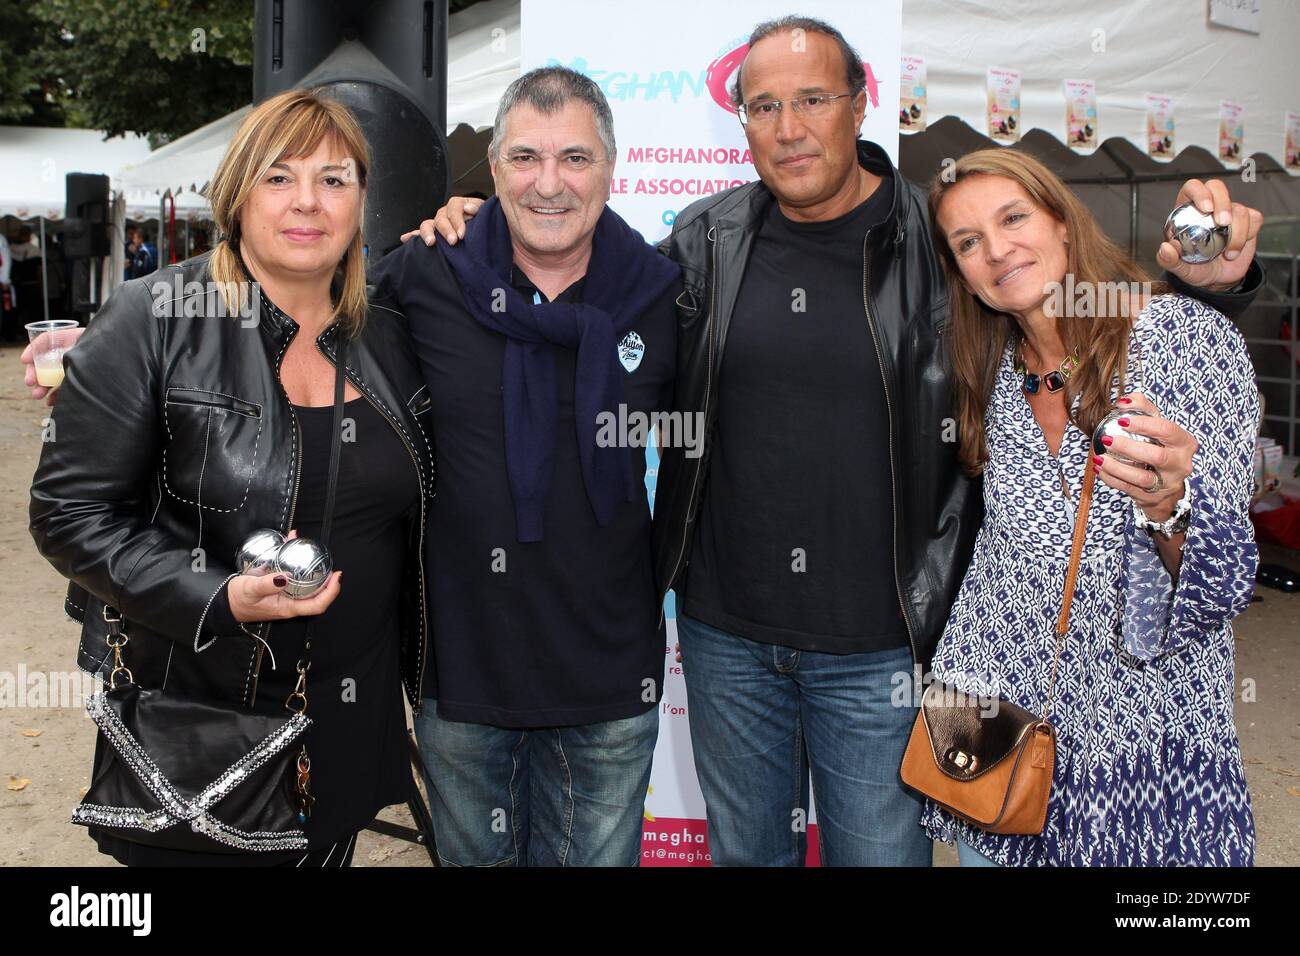 Michelle Bernier, Jean-Marie Bigard, Patrick Antonini and Martine Boukobza  attending The Petanque Tournament to benefit the association 'Meghanora'  held at Place des Invalides in Paris, France, on September 29, 2013. Photo  by